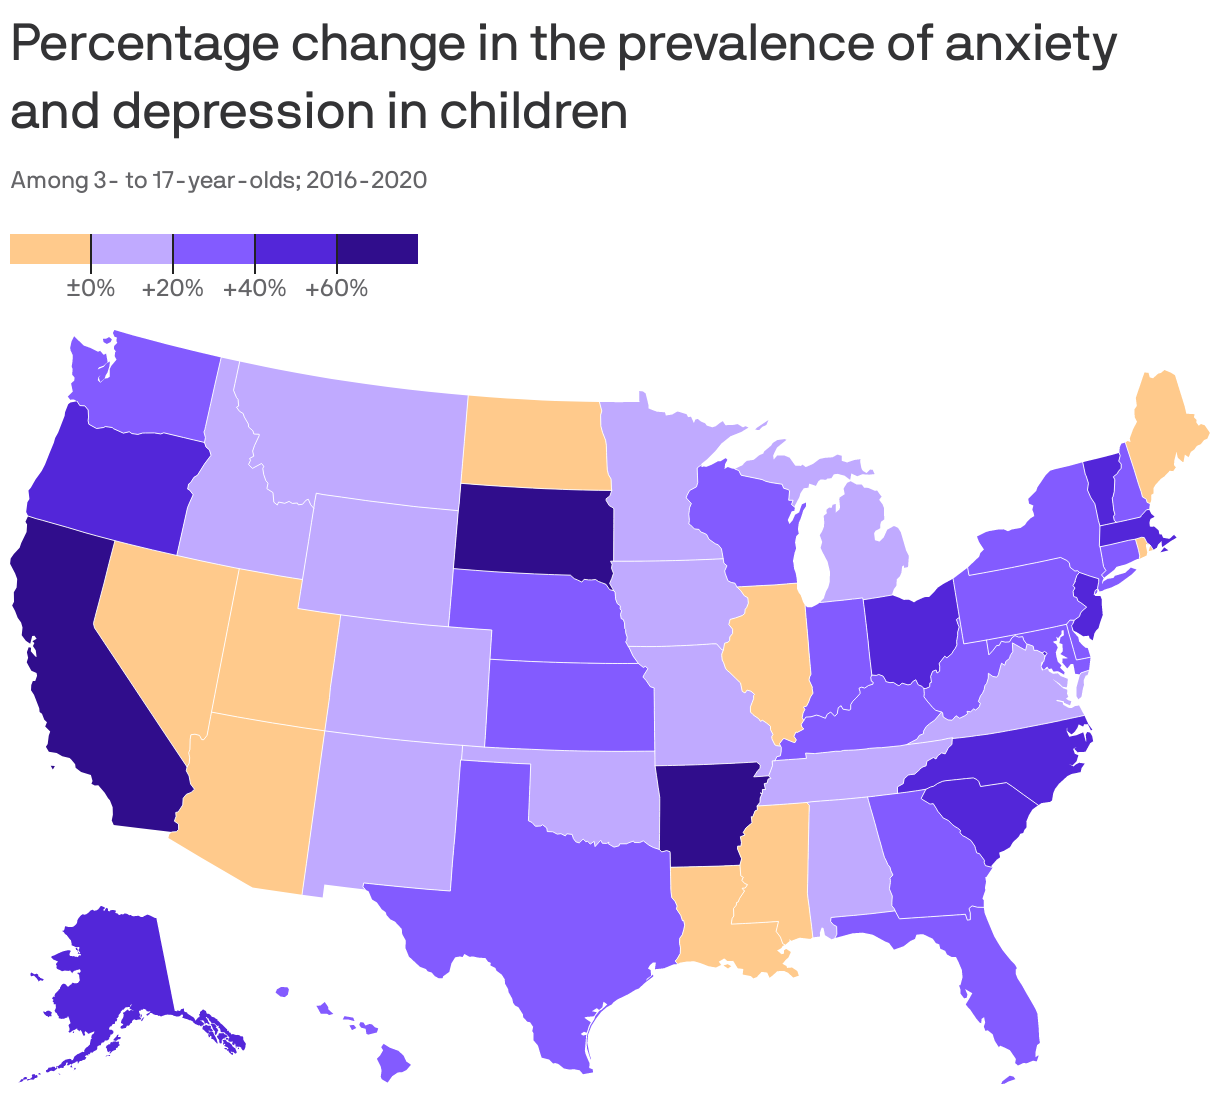 Percentage change in the prevalence of anxiety and depression in children